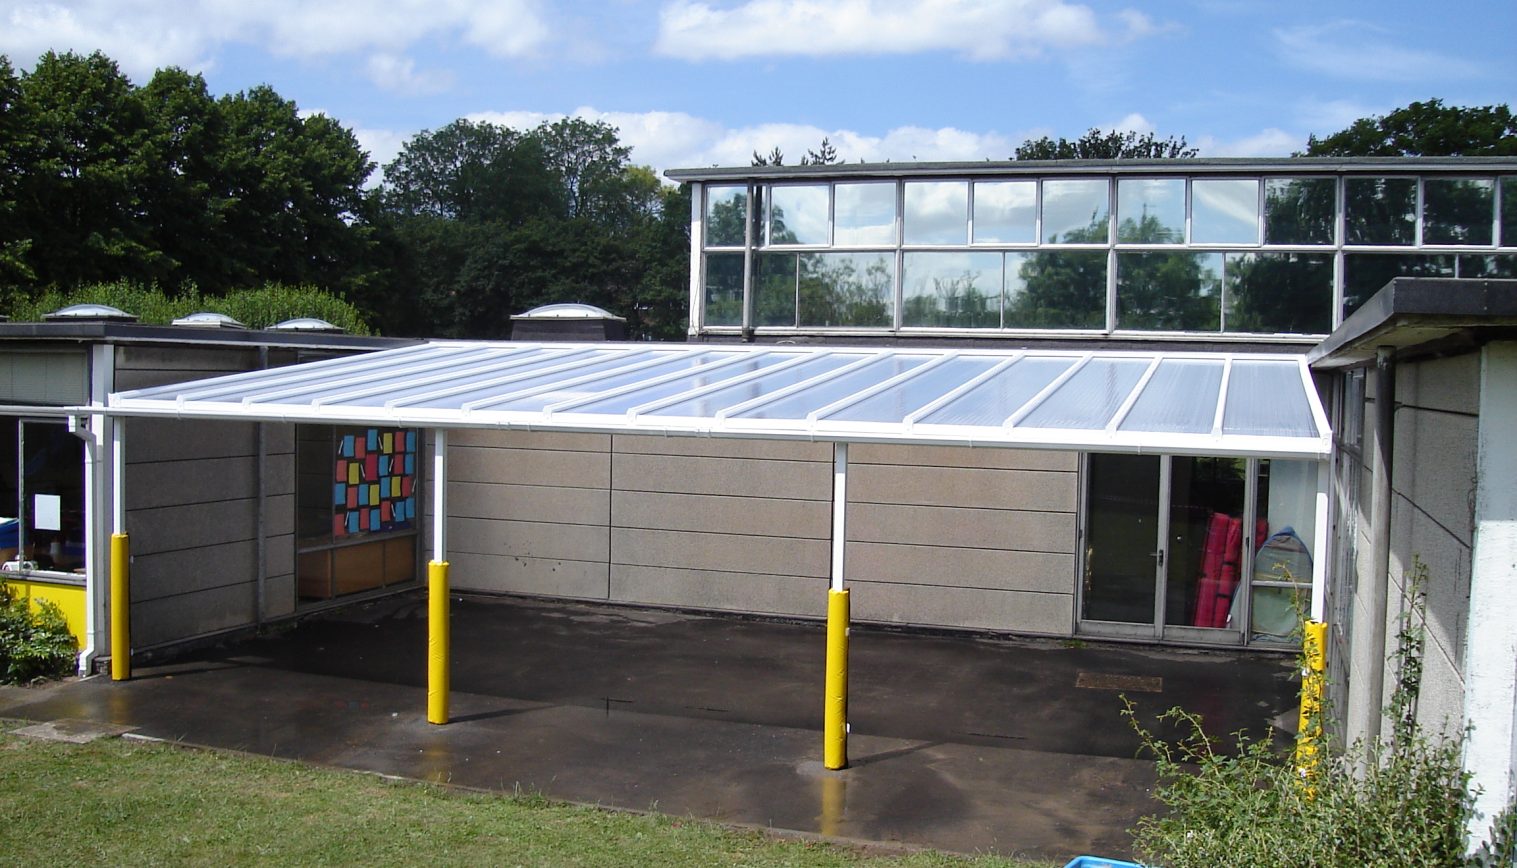 Hobbs Hill Wood Primary School – Wall Mounted Canopy – First Install